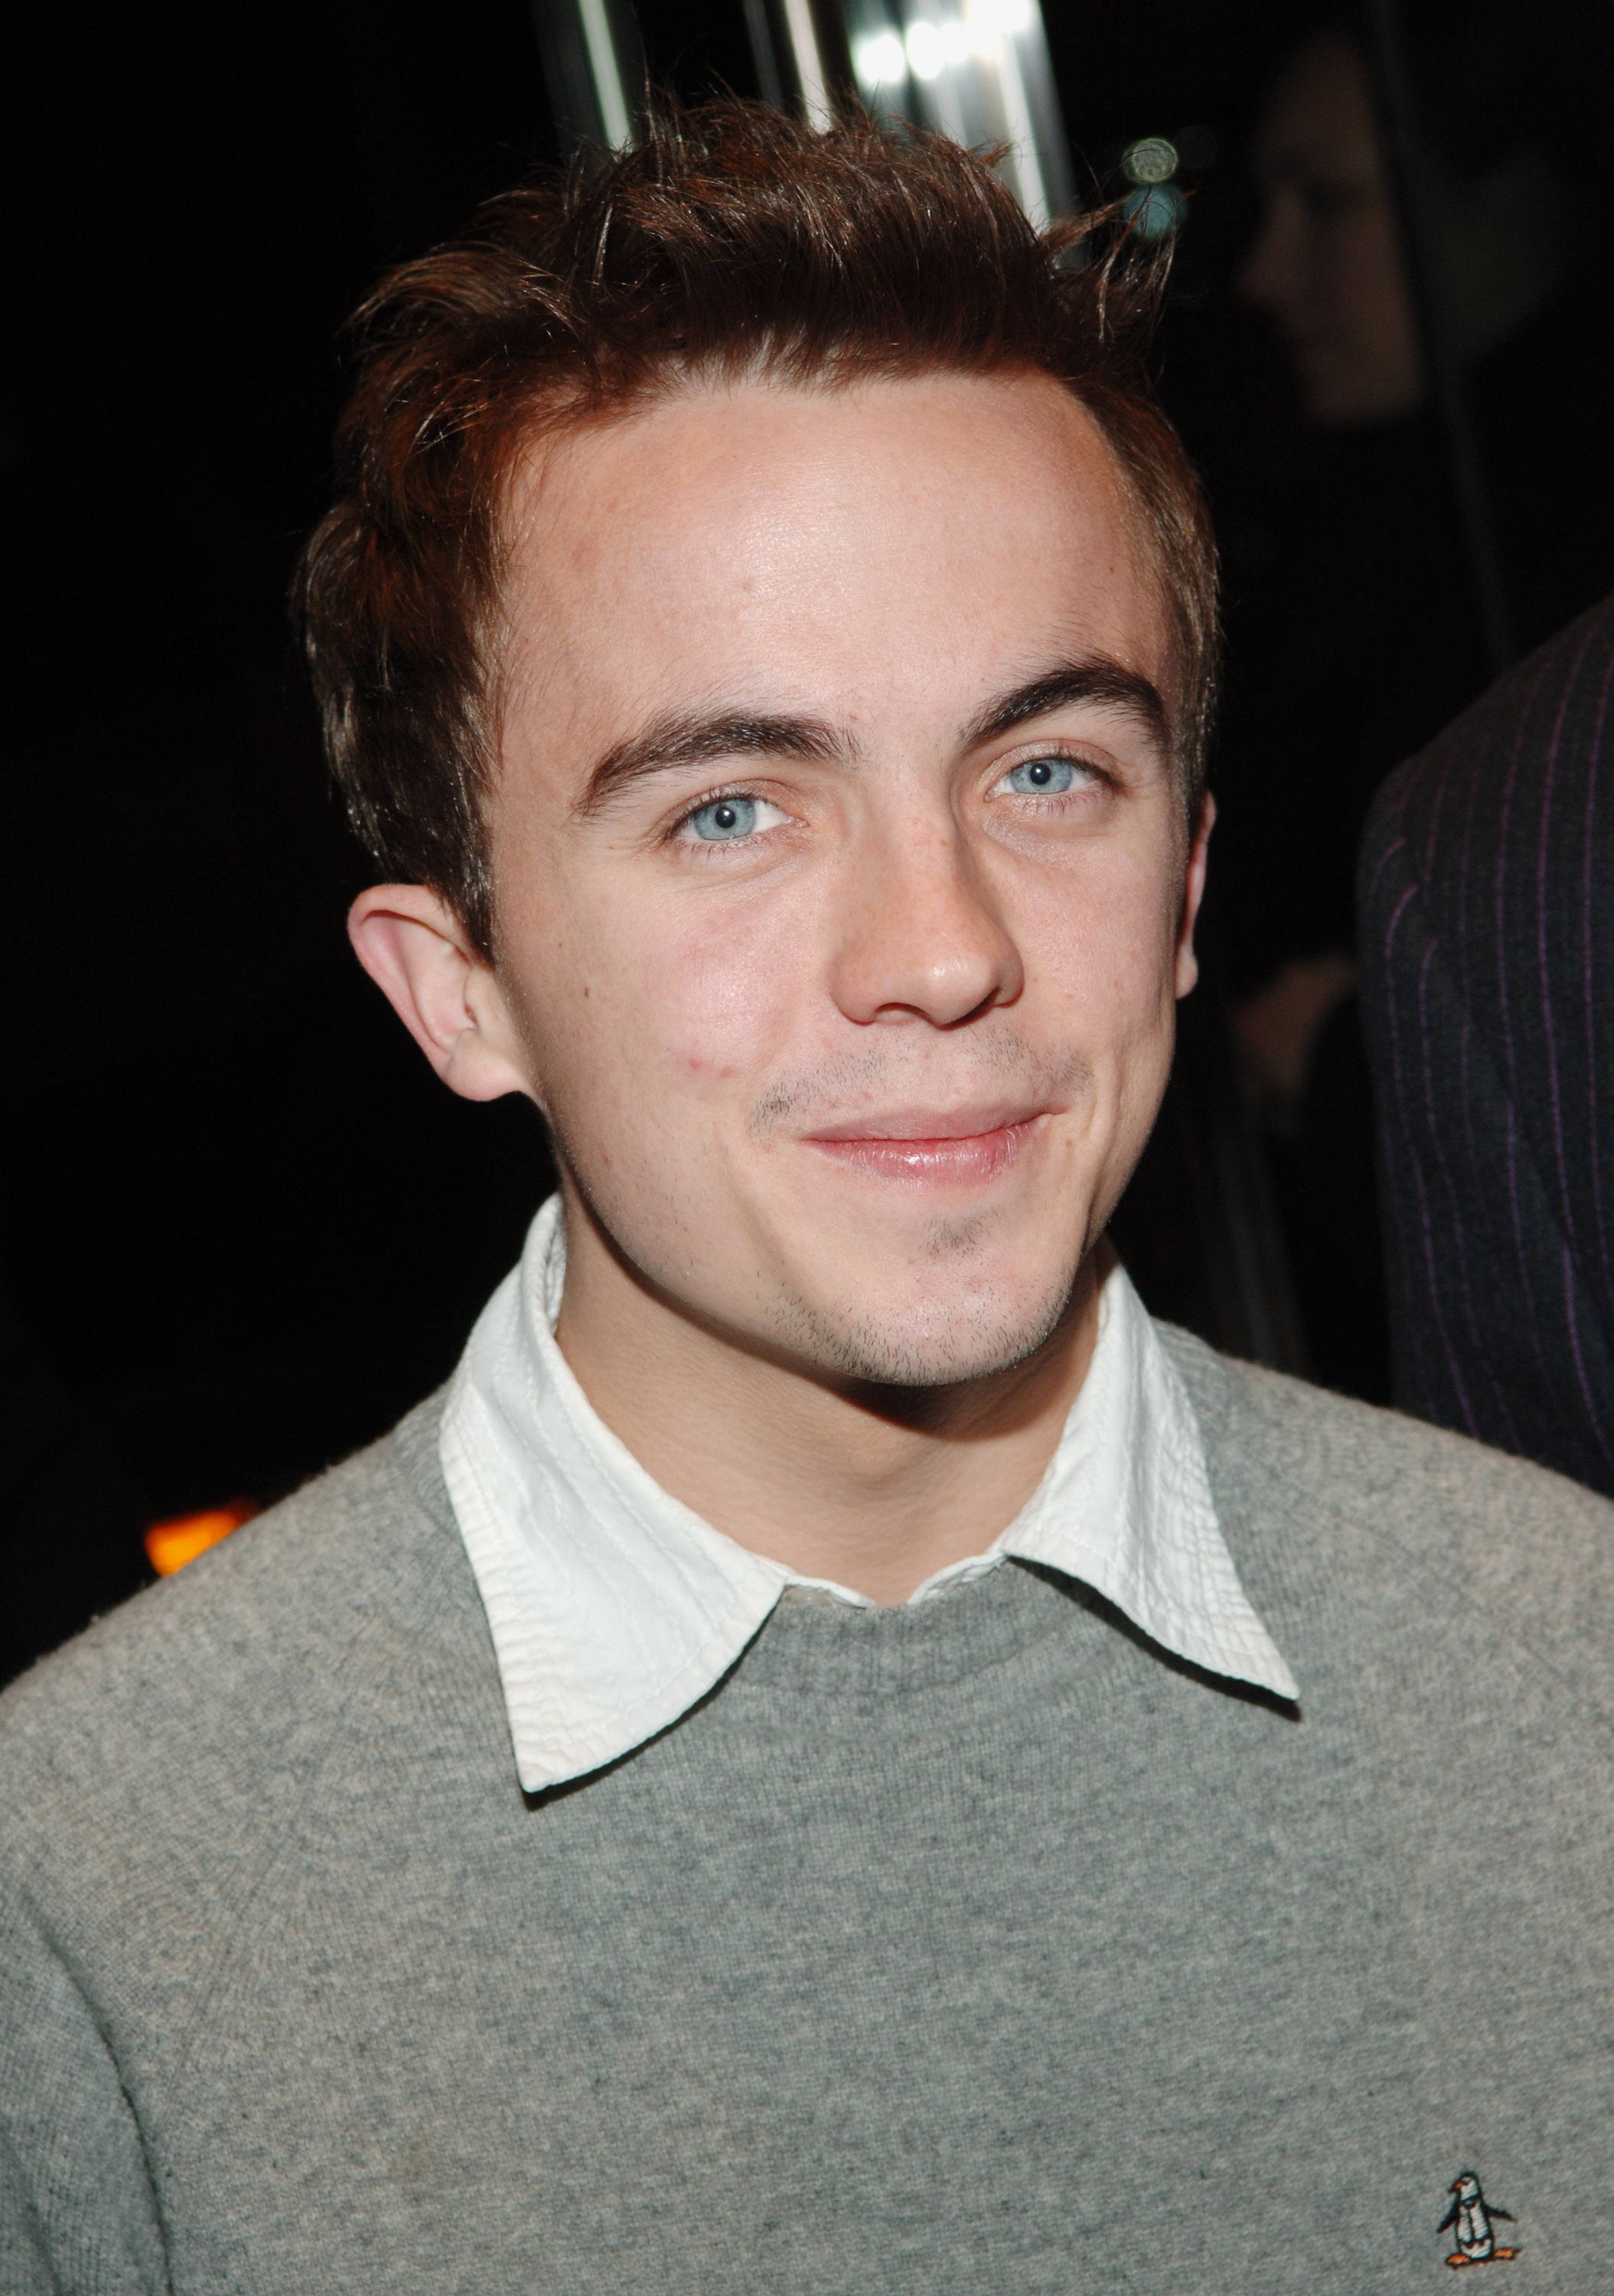 Frankie Muniz on March 21, 2006 in New York City | Source: Getty Images